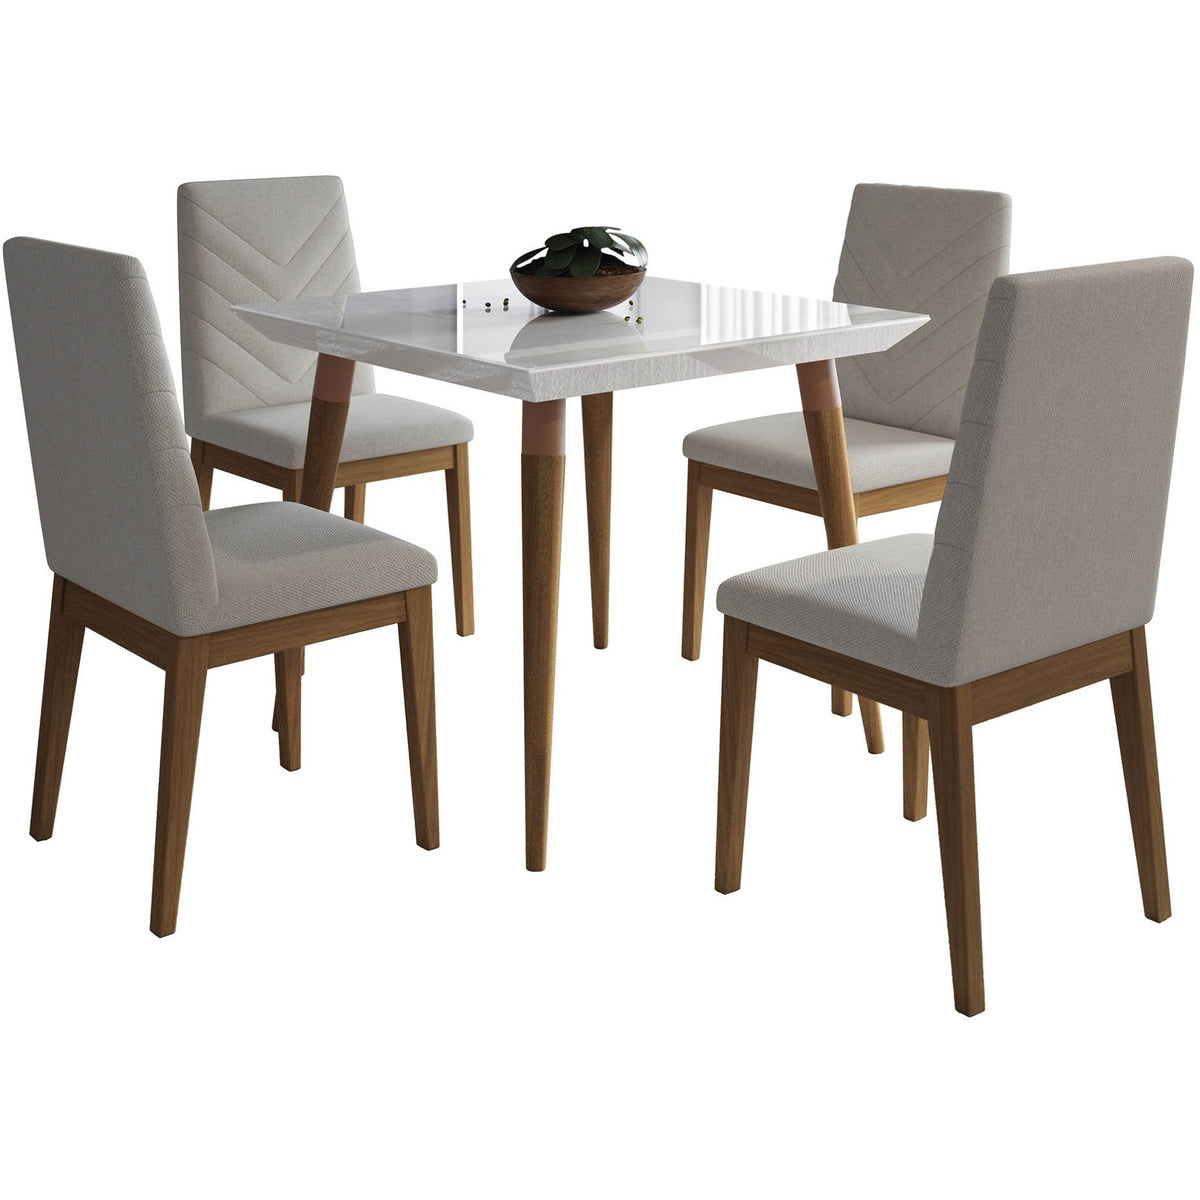 Manhattan Comfort 5-Piece Utopia 35.43" and Catherine Dining Set with 4 Dining Chairs in White Gloss and Beige-Minimal & Modern